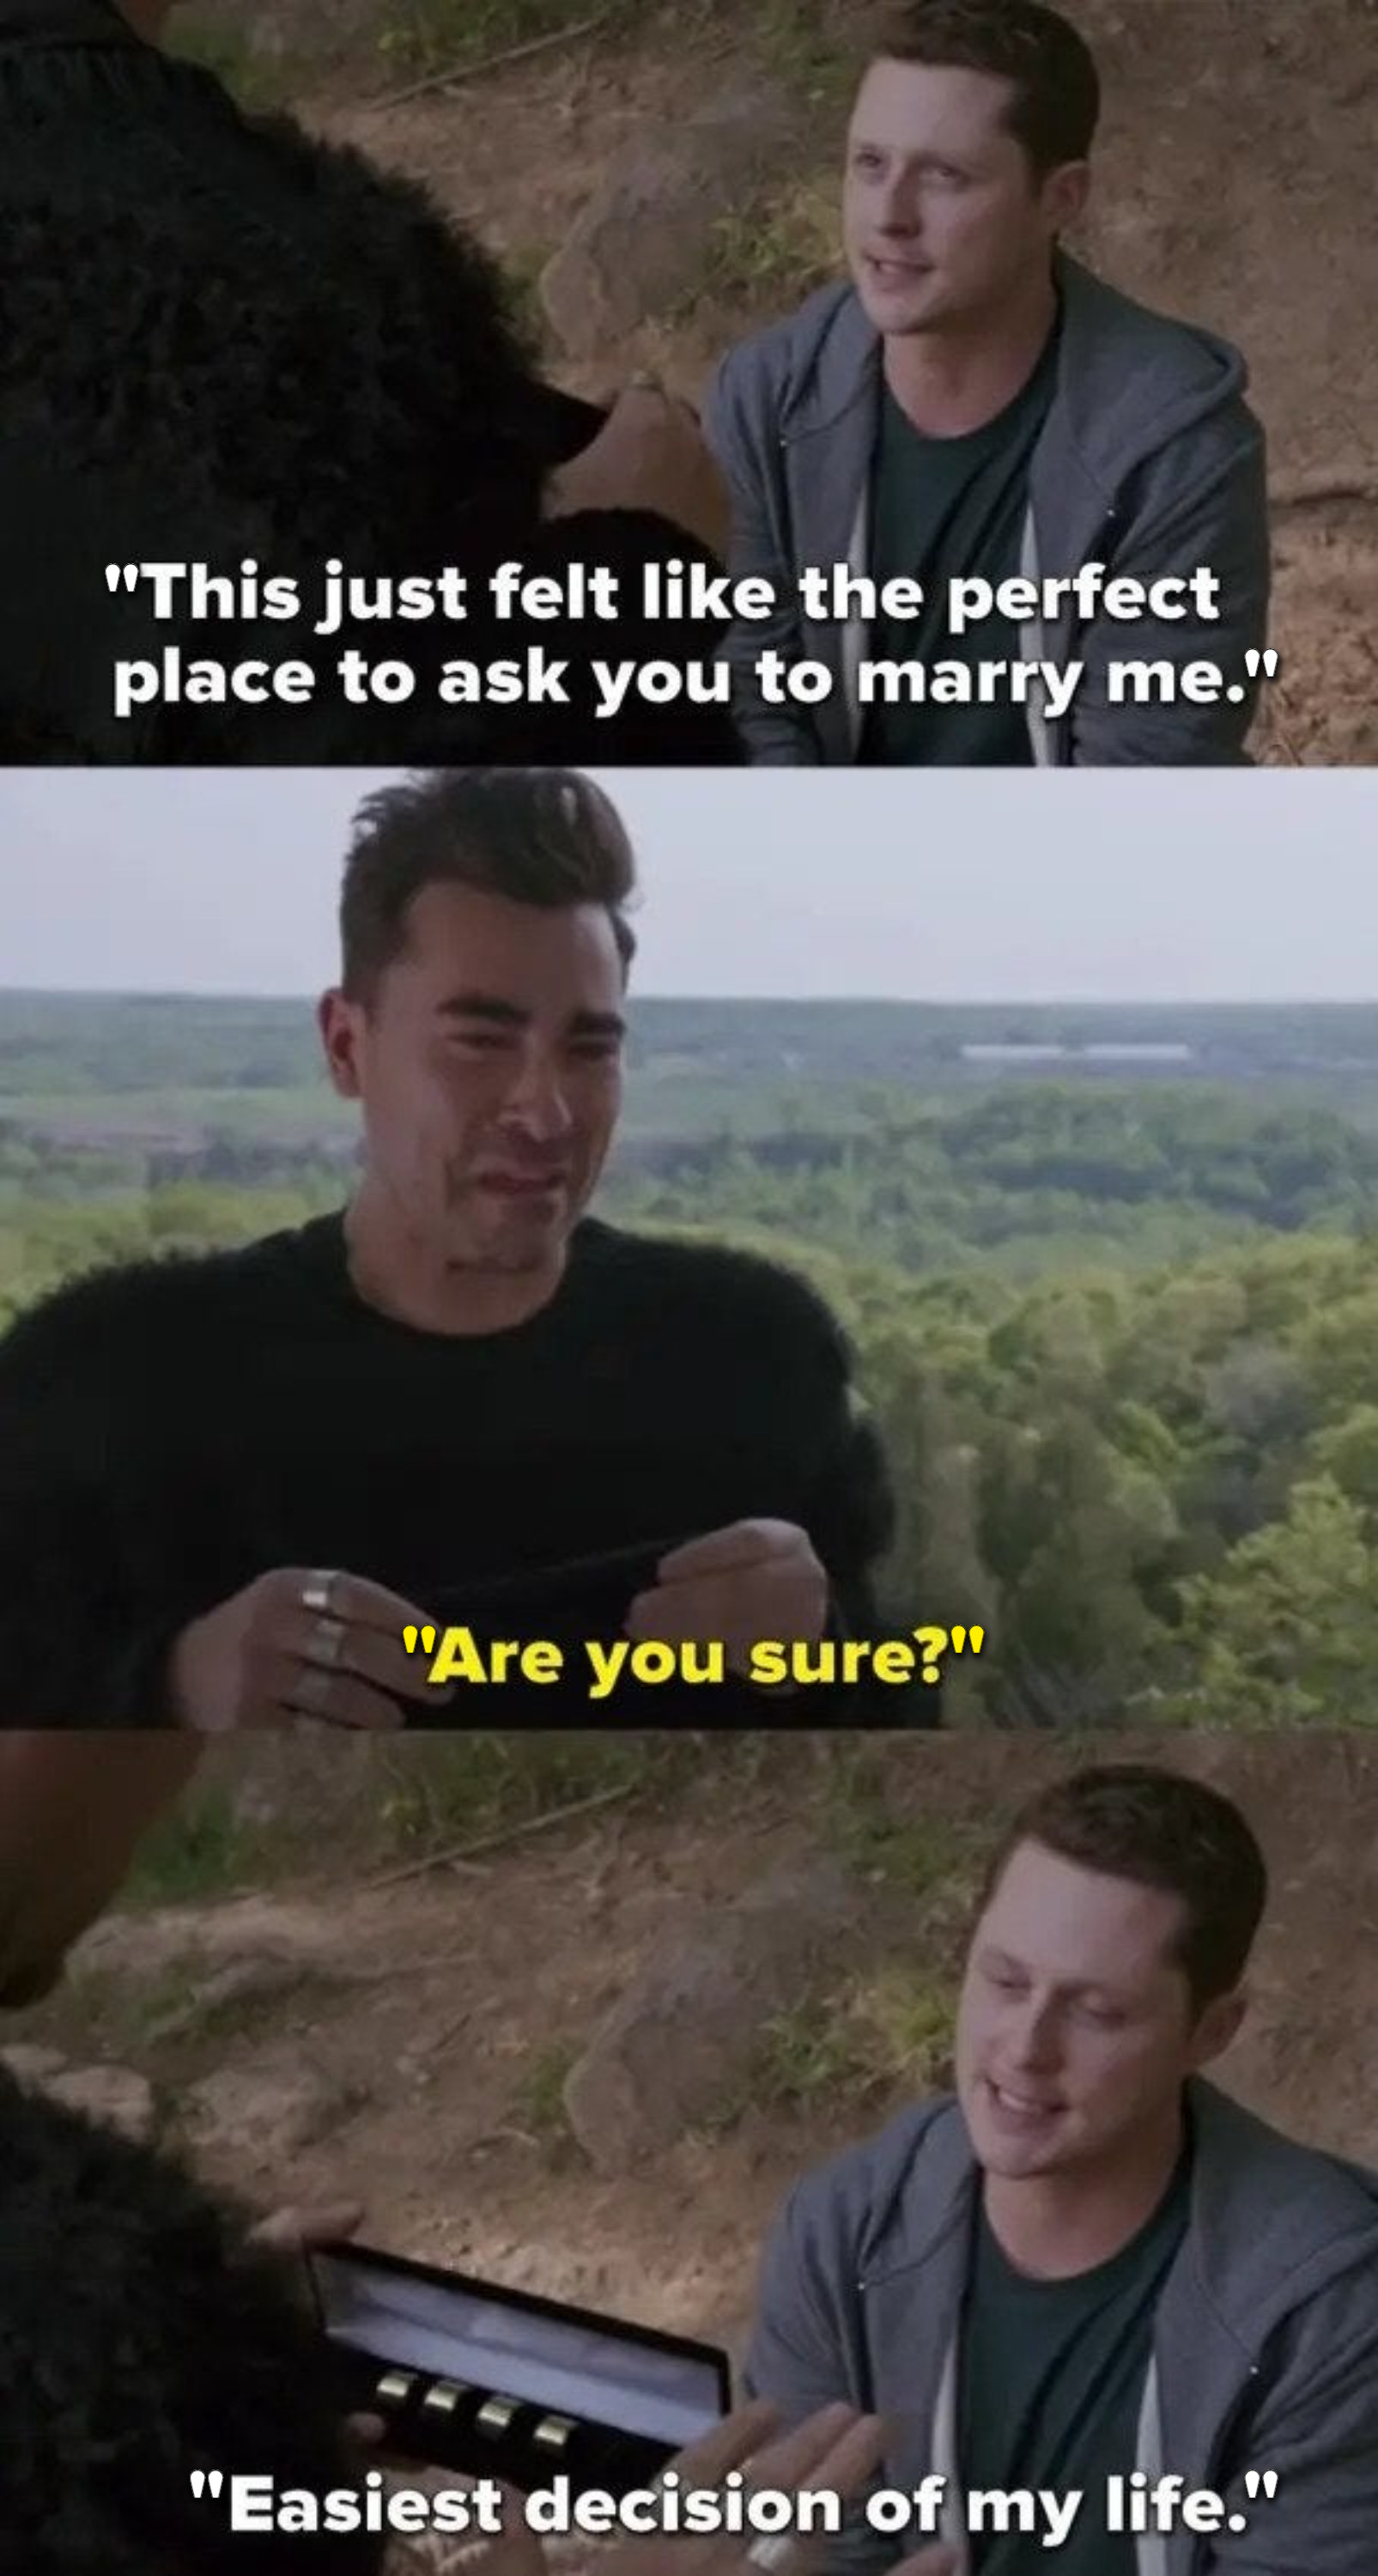 Patrick asks David to marry him, and David asks if he&#x27;s sure, and Patrick replies &quot;Easiest decision of my life&quot;